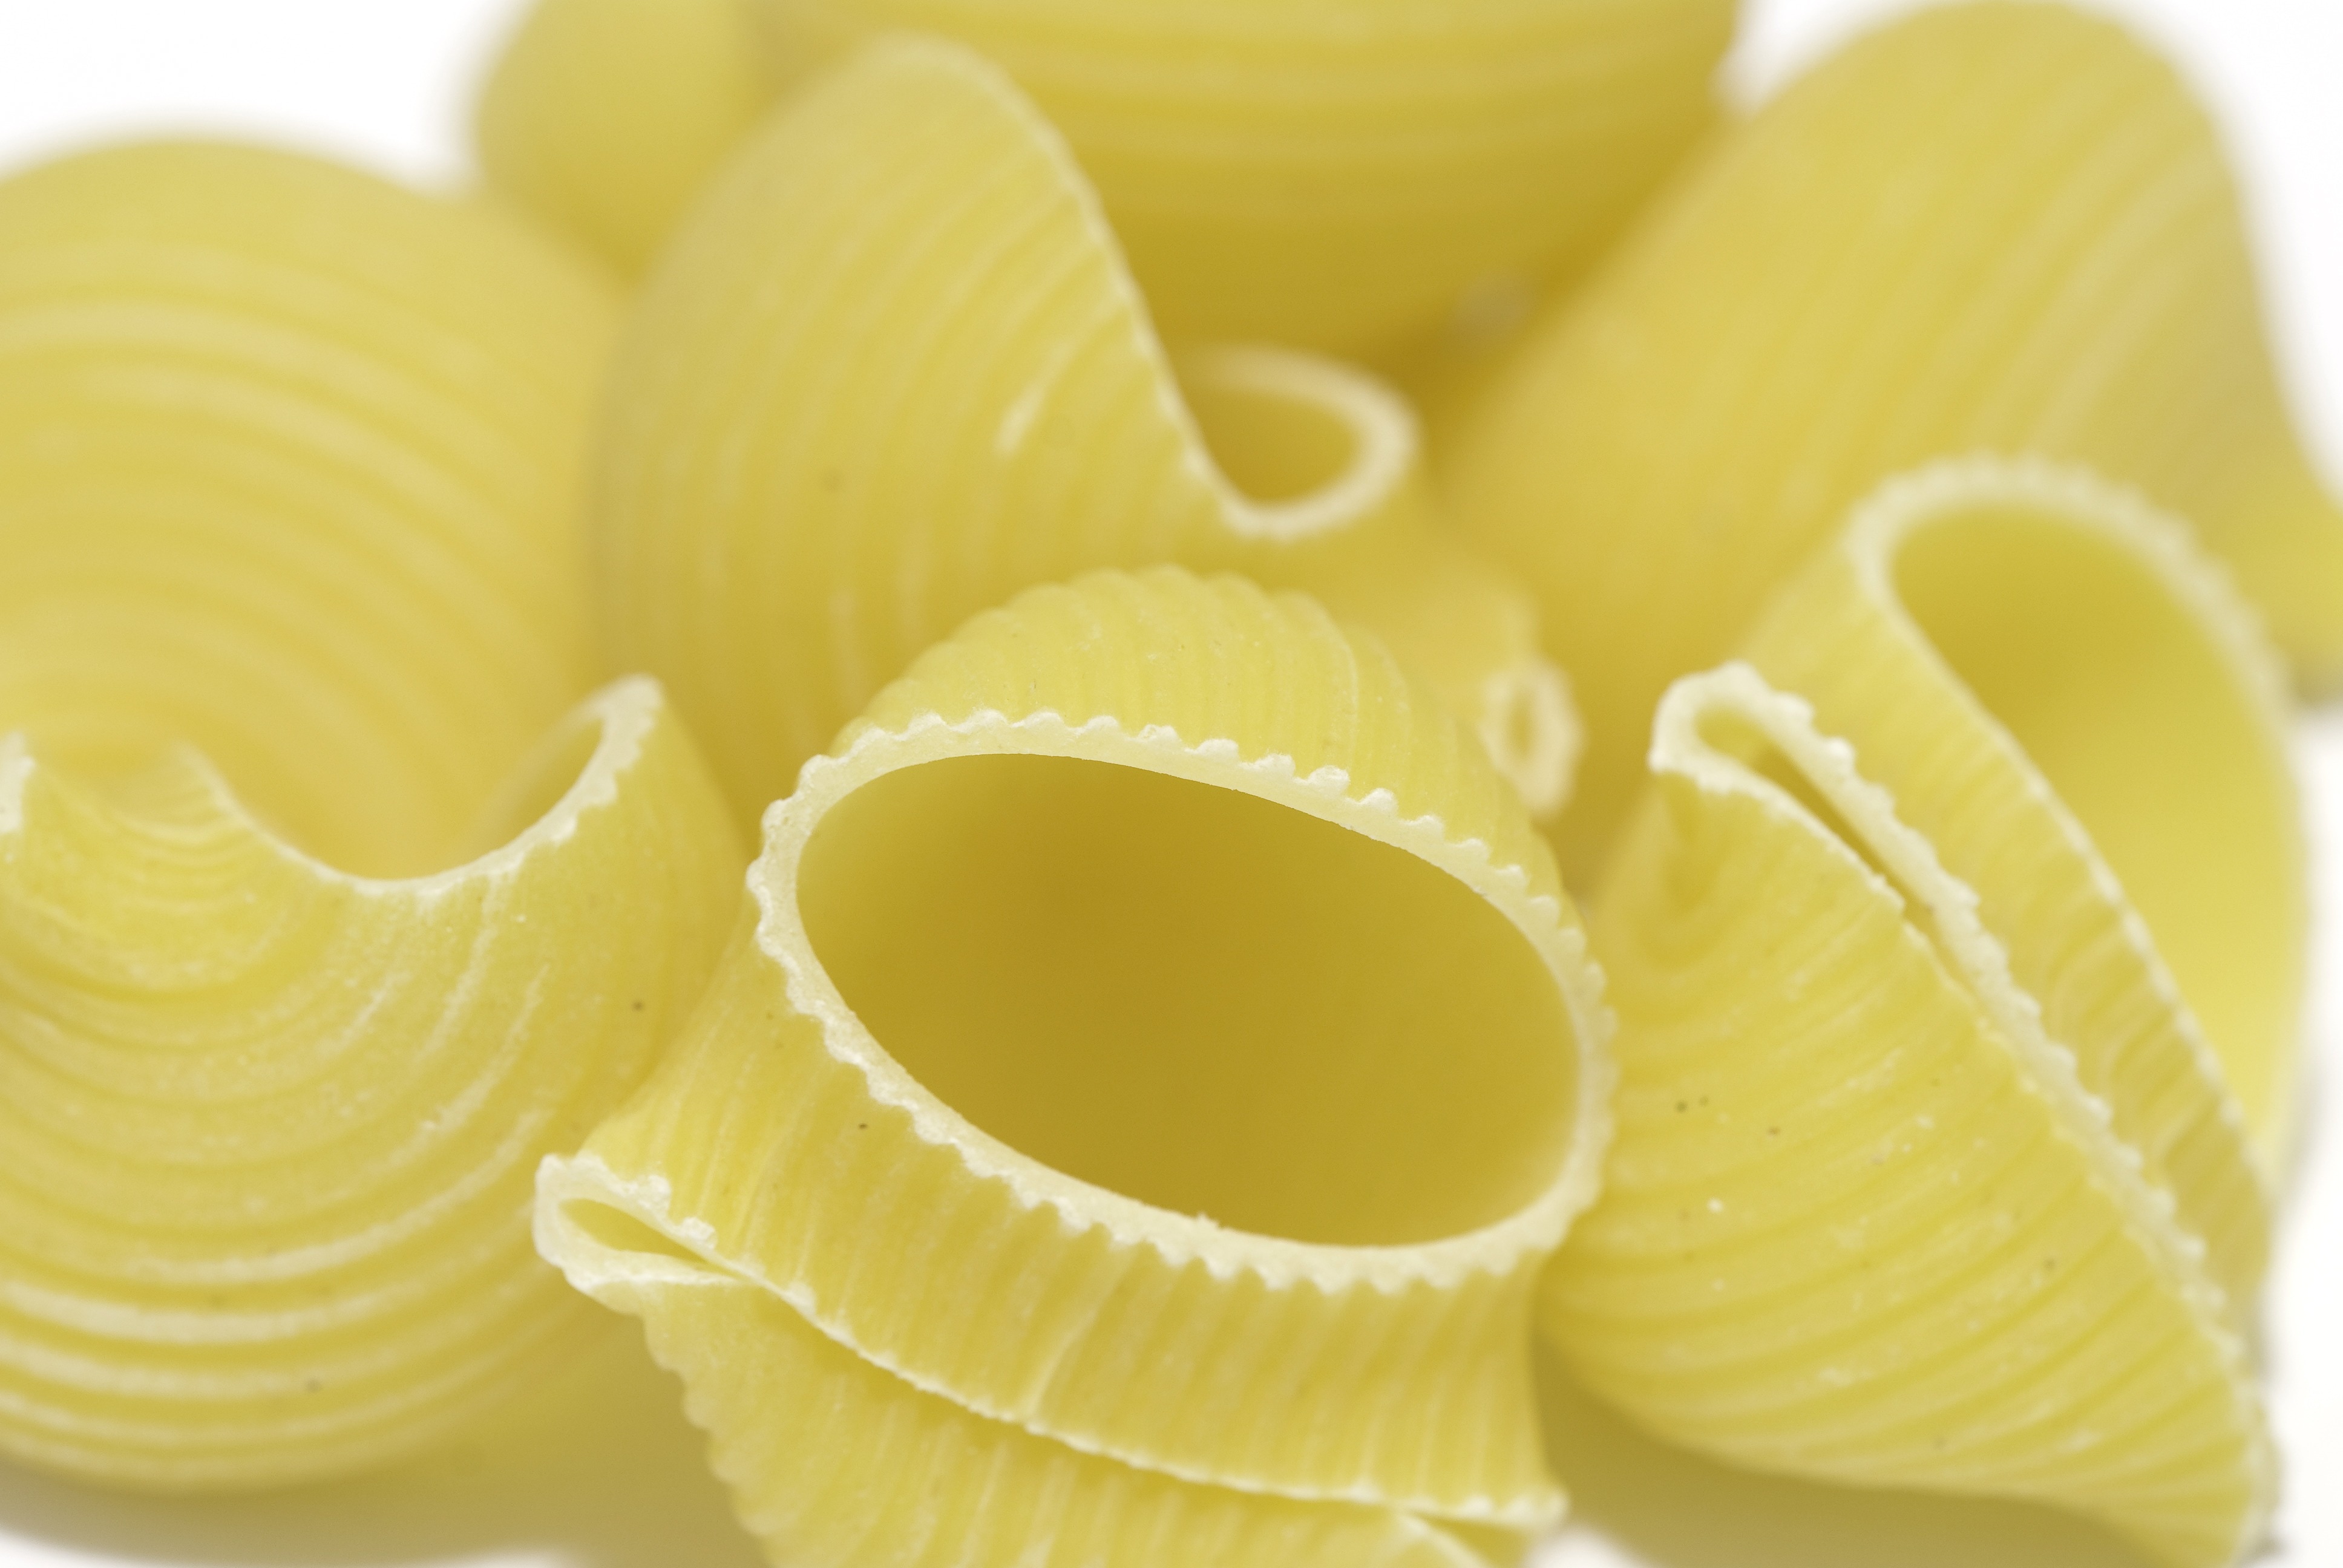 Download Pasta Oil Food Yellow Close Up Free Image Peakpx Yellowimages Mockups